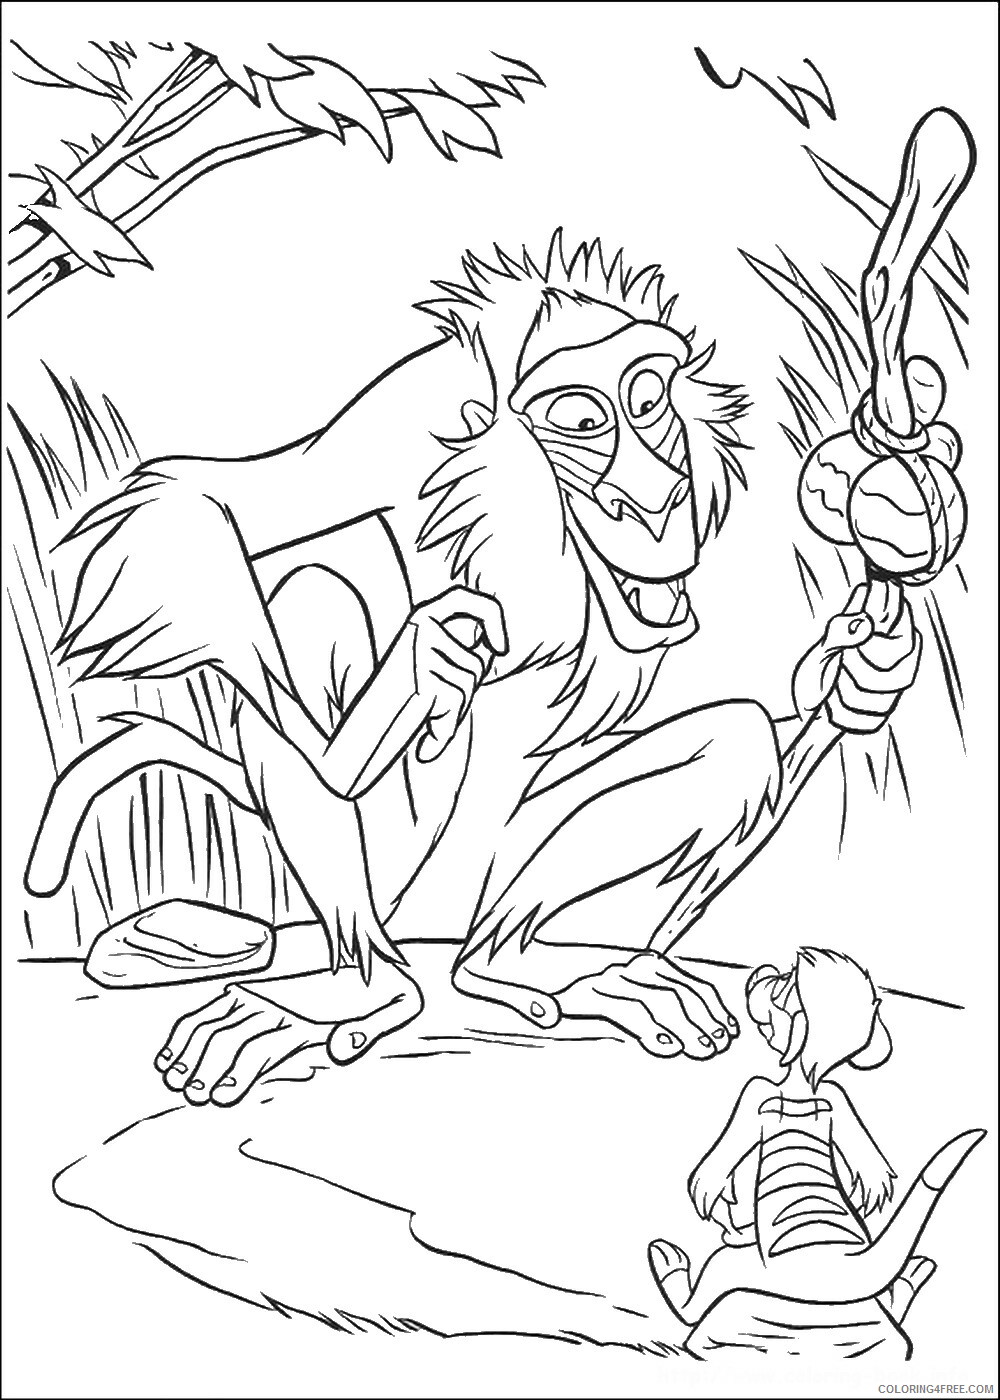 The Lion King Coloring Pages TV Film lionking_40 Printable 2020 09164 Coloring4free